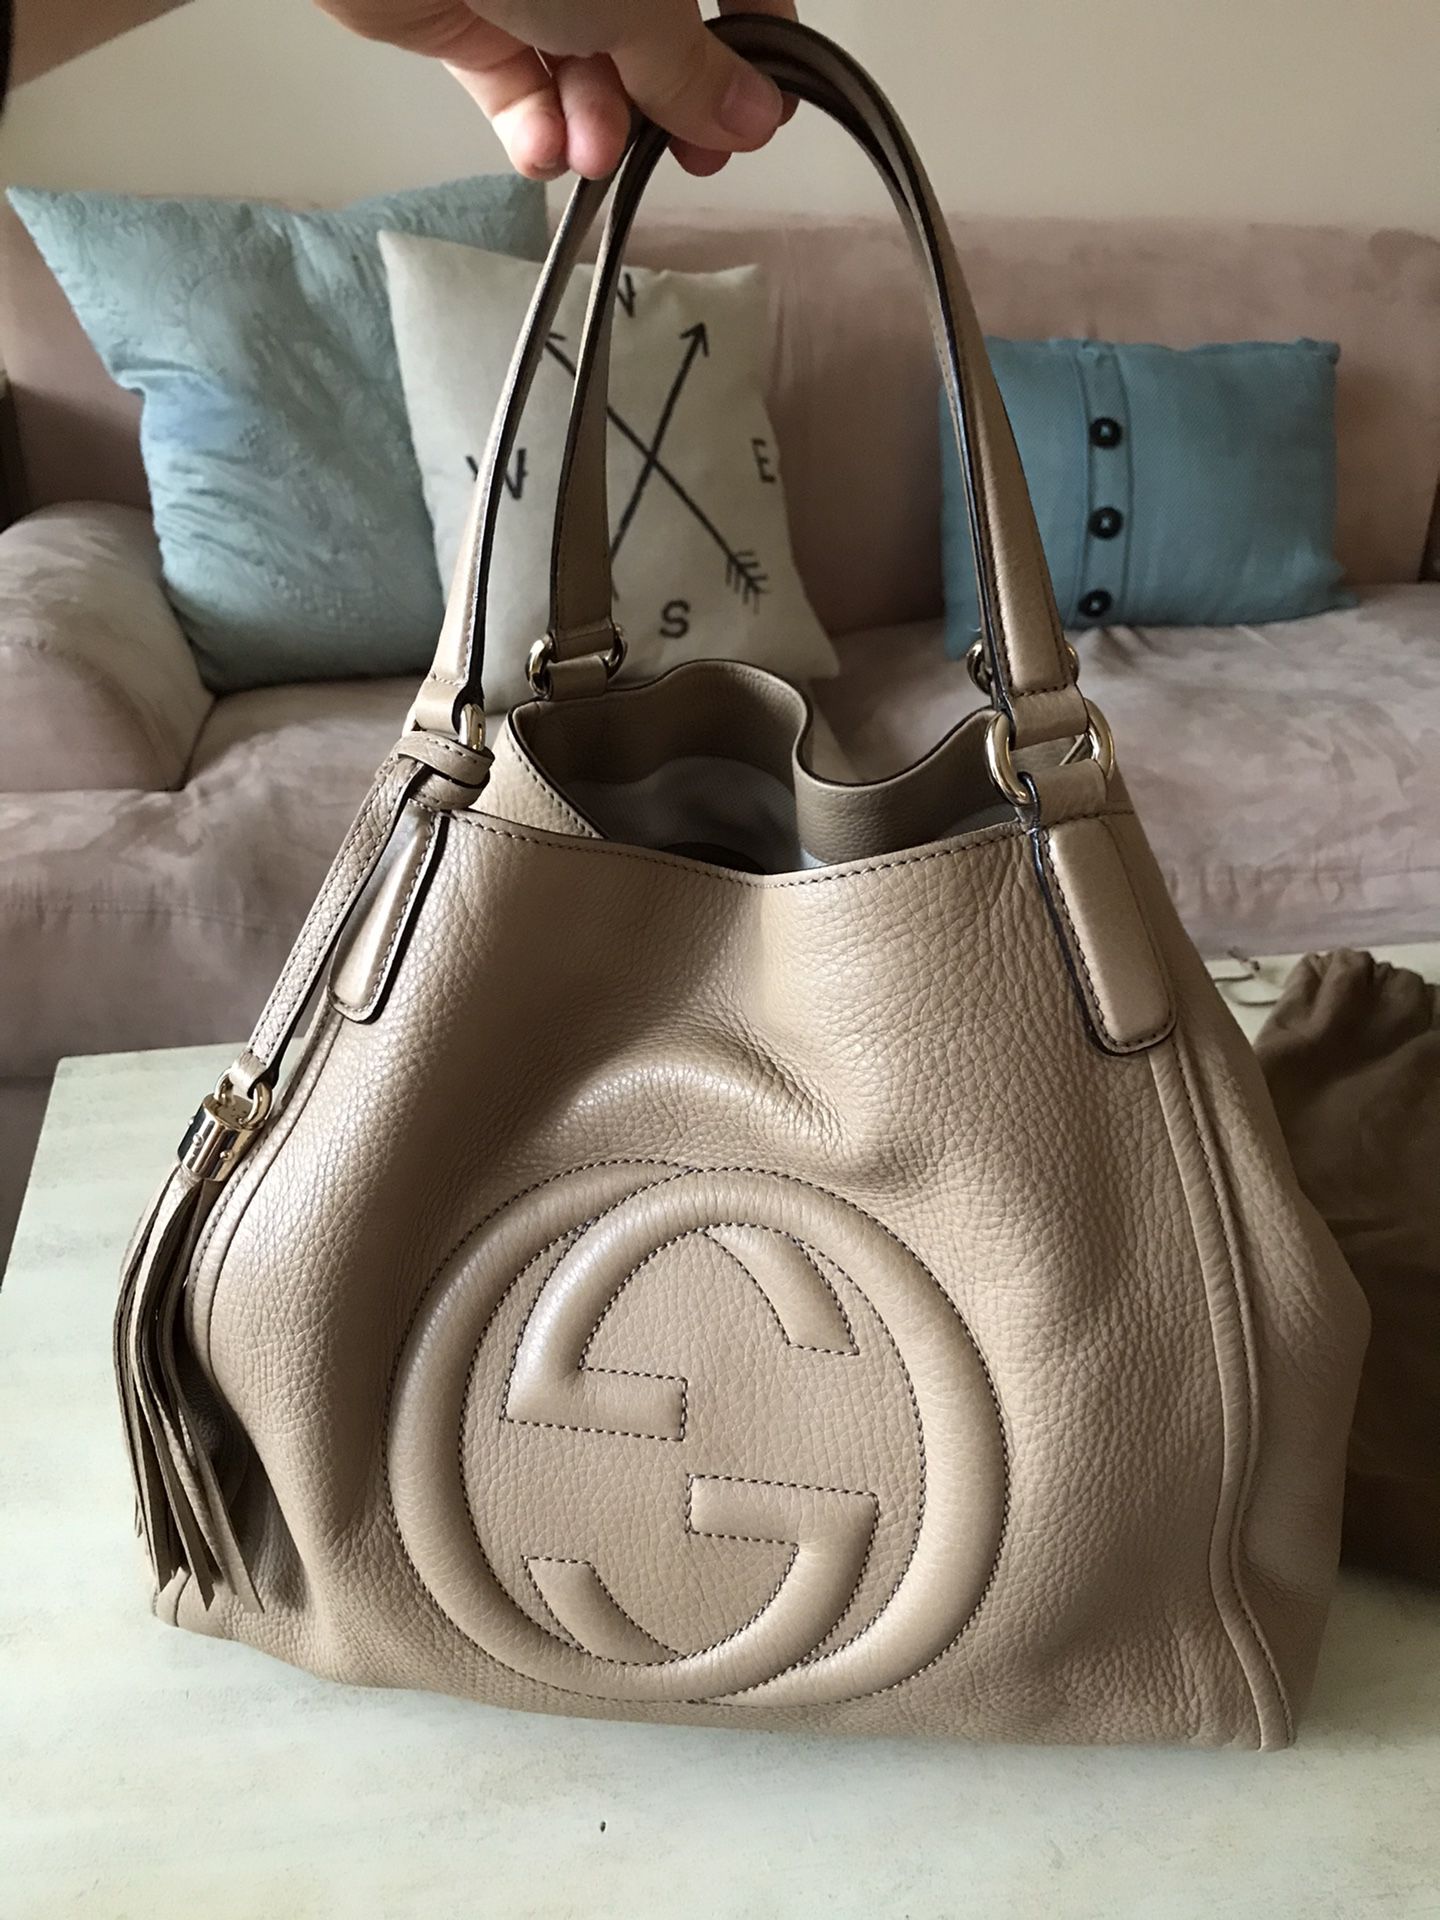 Authentic Gucci soho tote bag